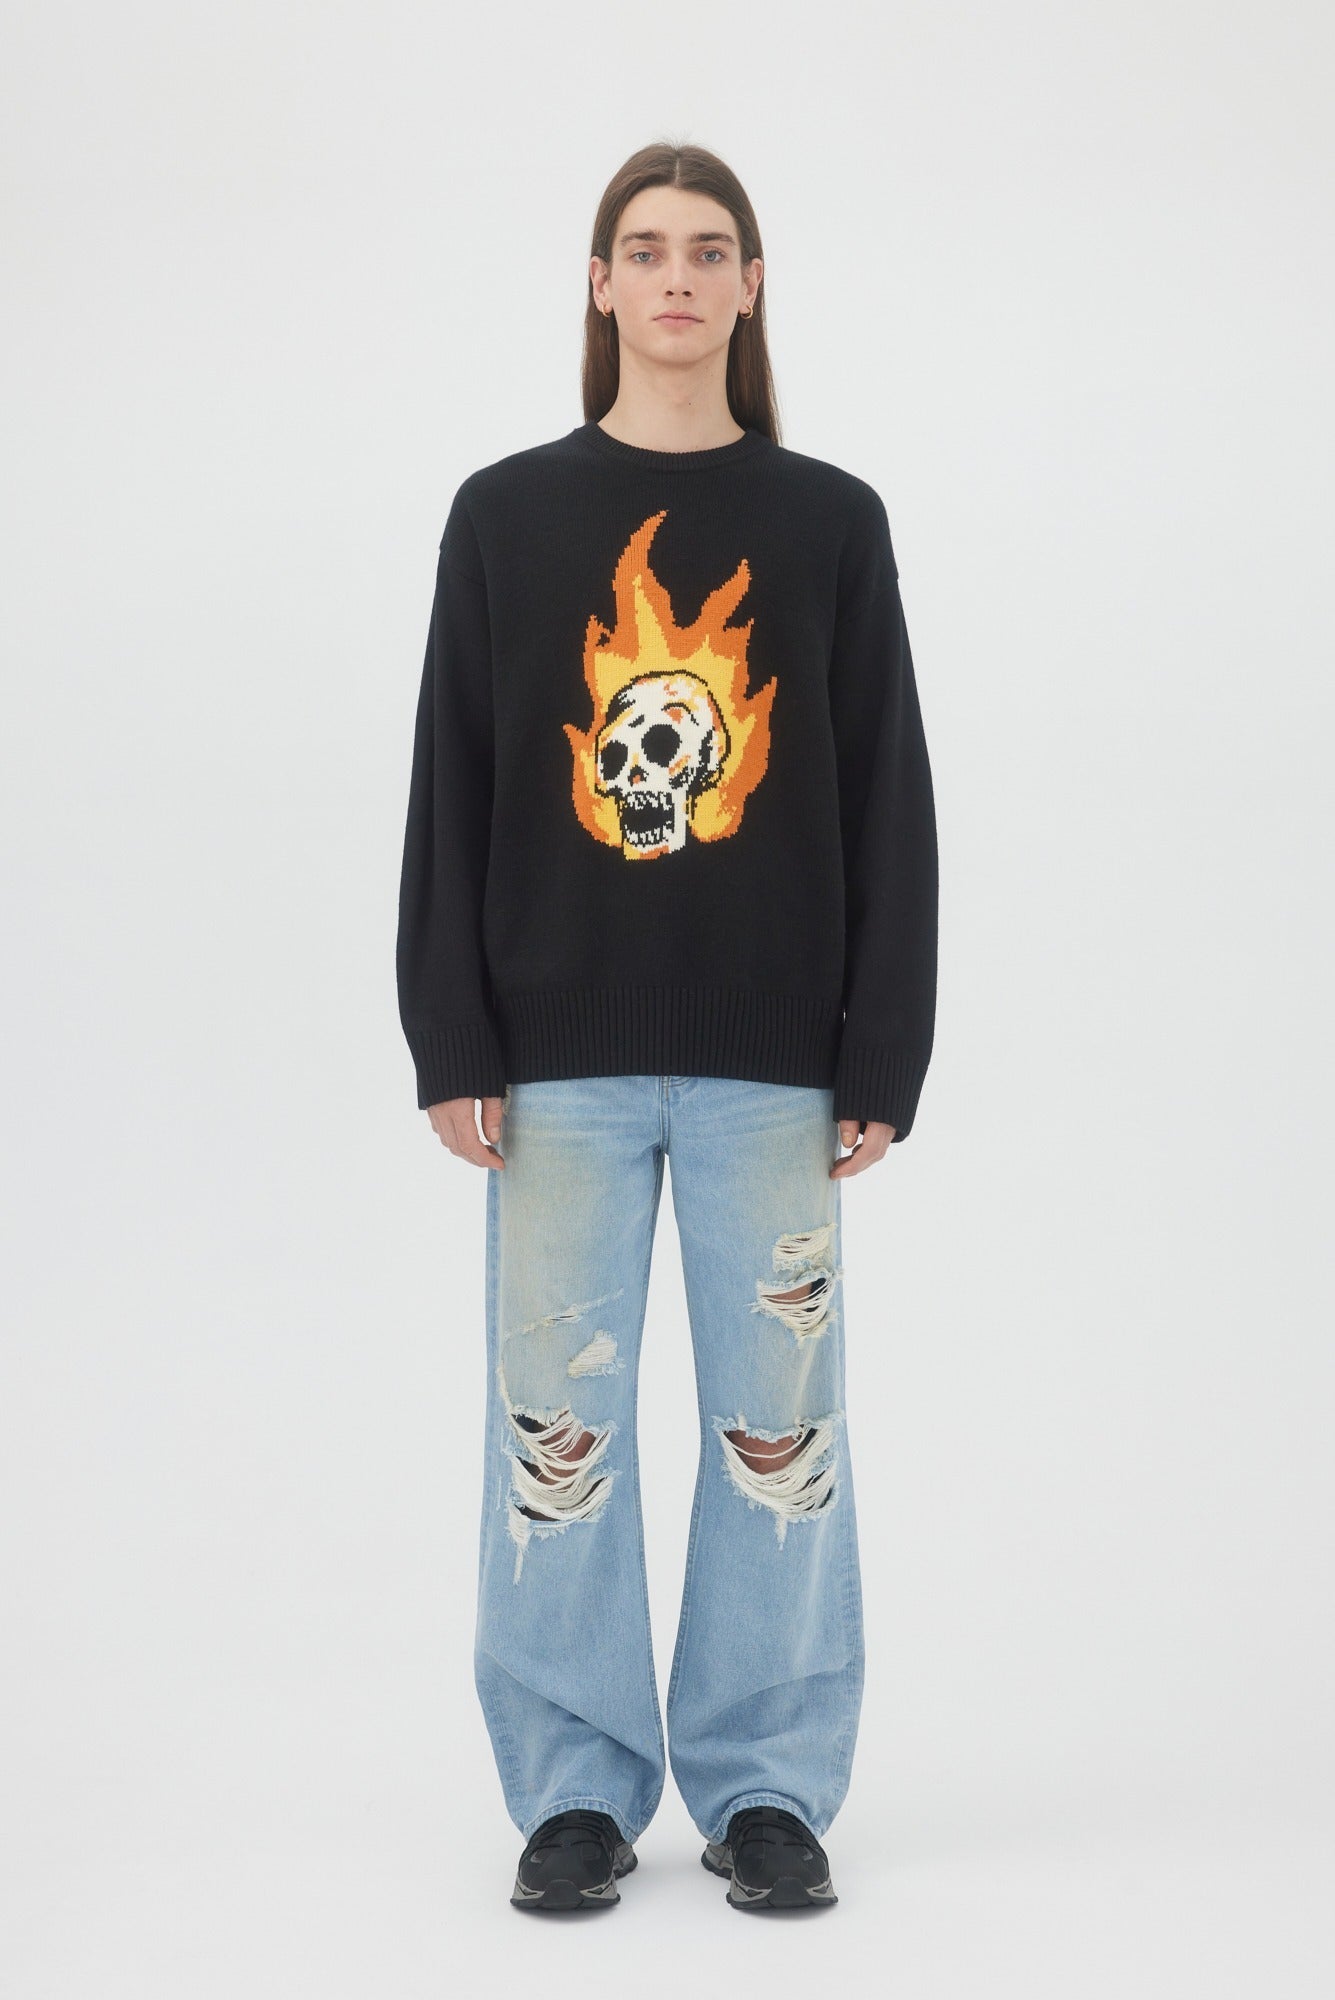 Fucking Awesome Flame Skull Pullover Hoodie / Navy